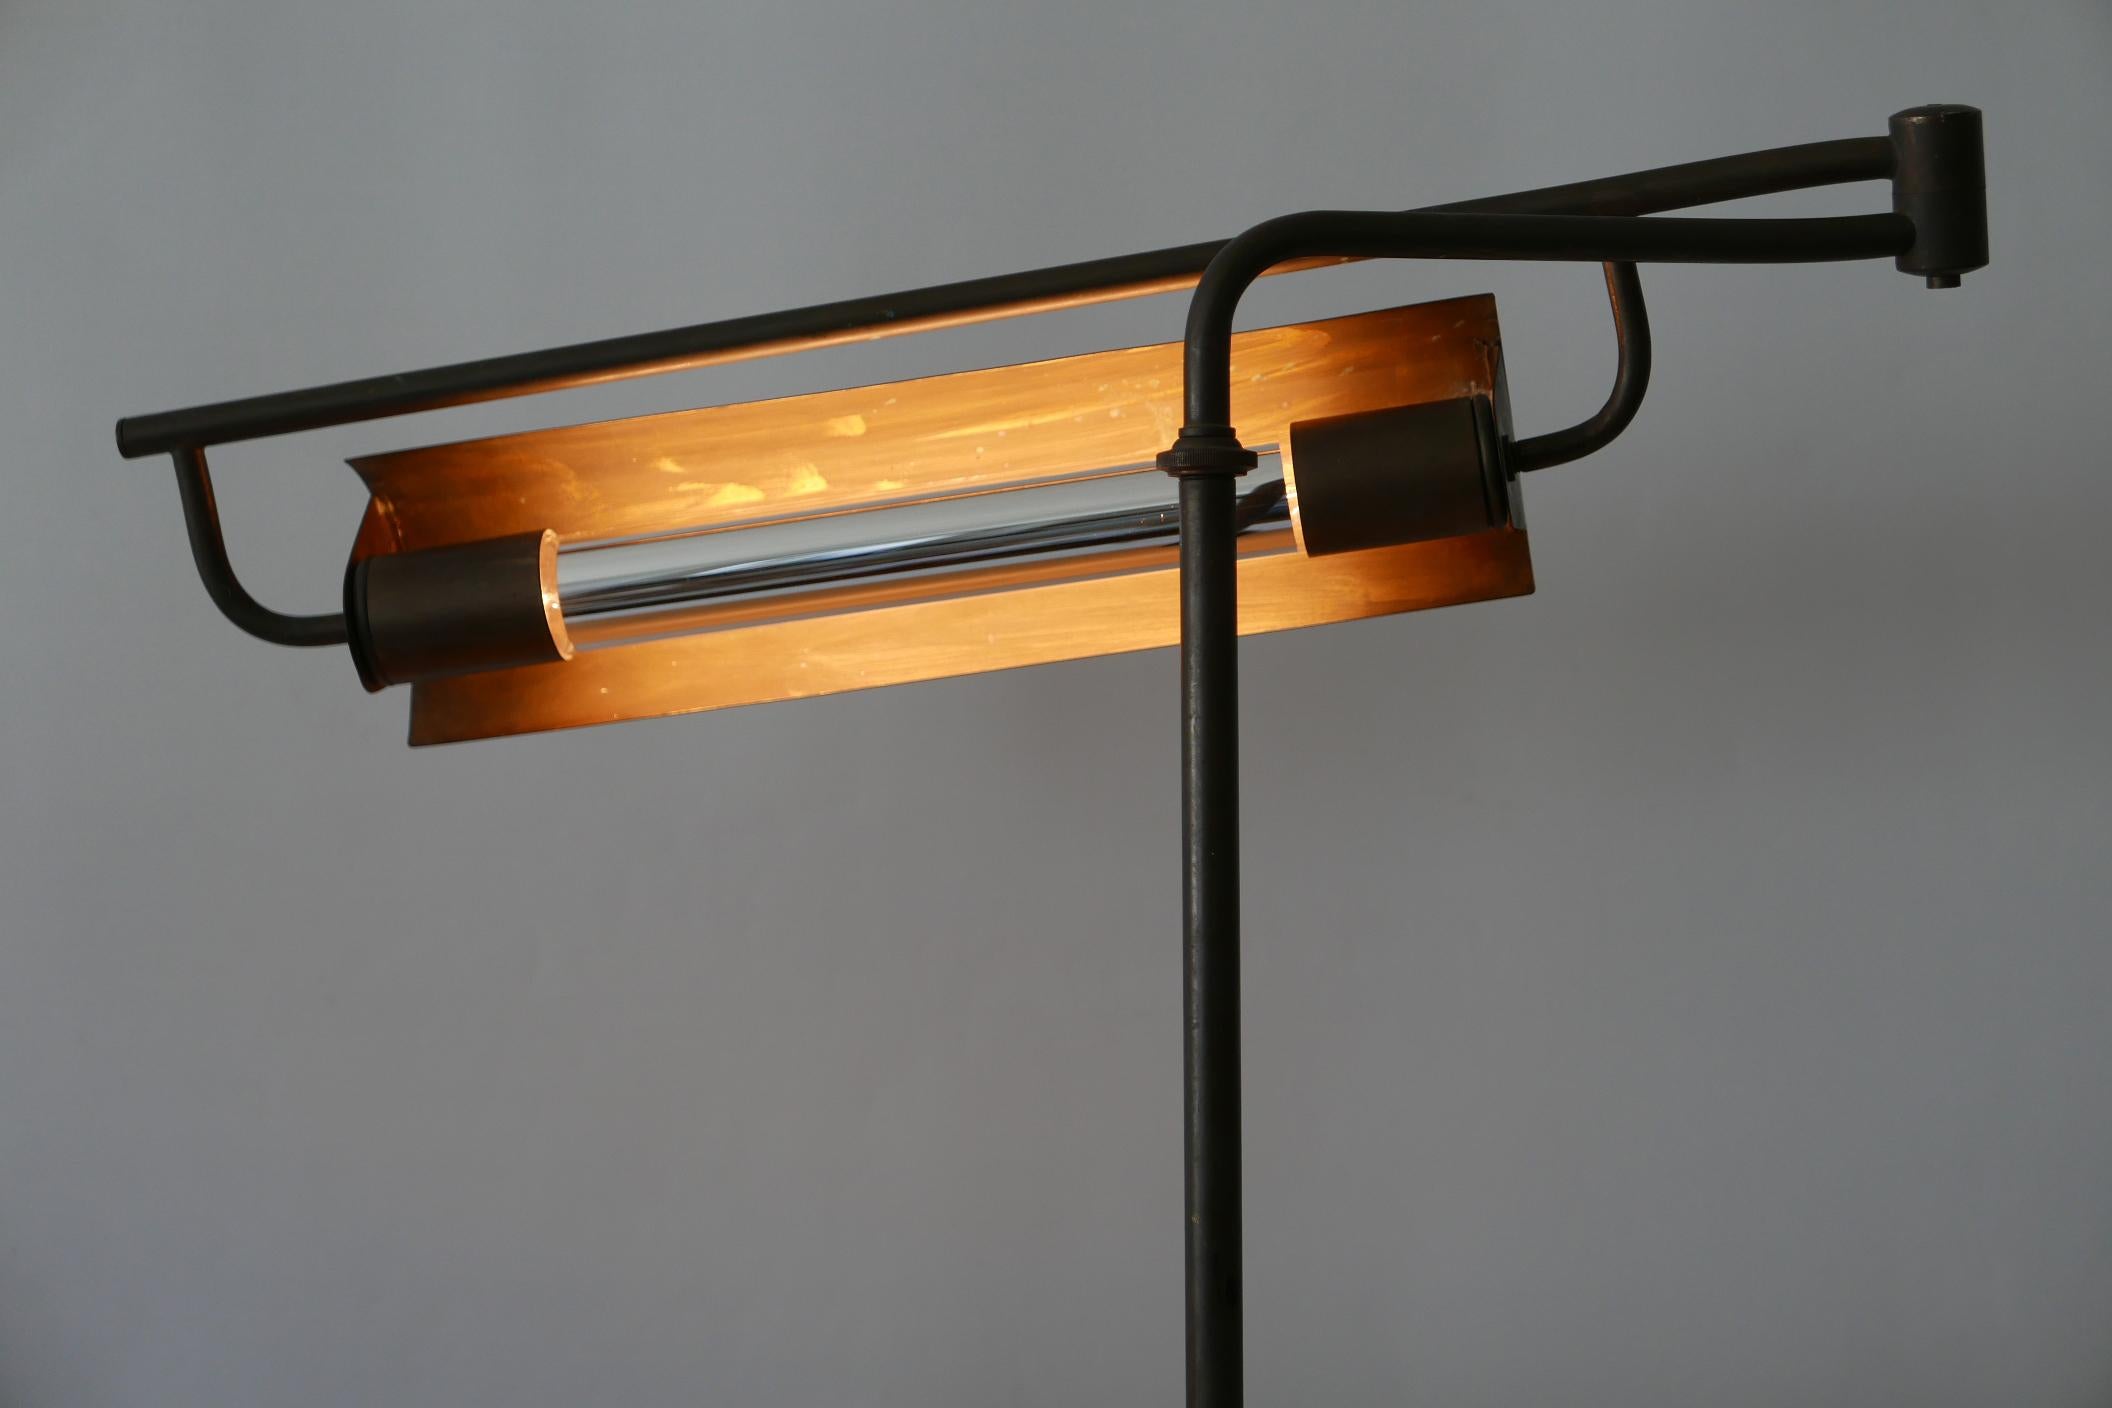 Exceptional Modernist Bauhaus Articulated Brass Clamp Table Lamp, Germany, 1930s For Sale 2